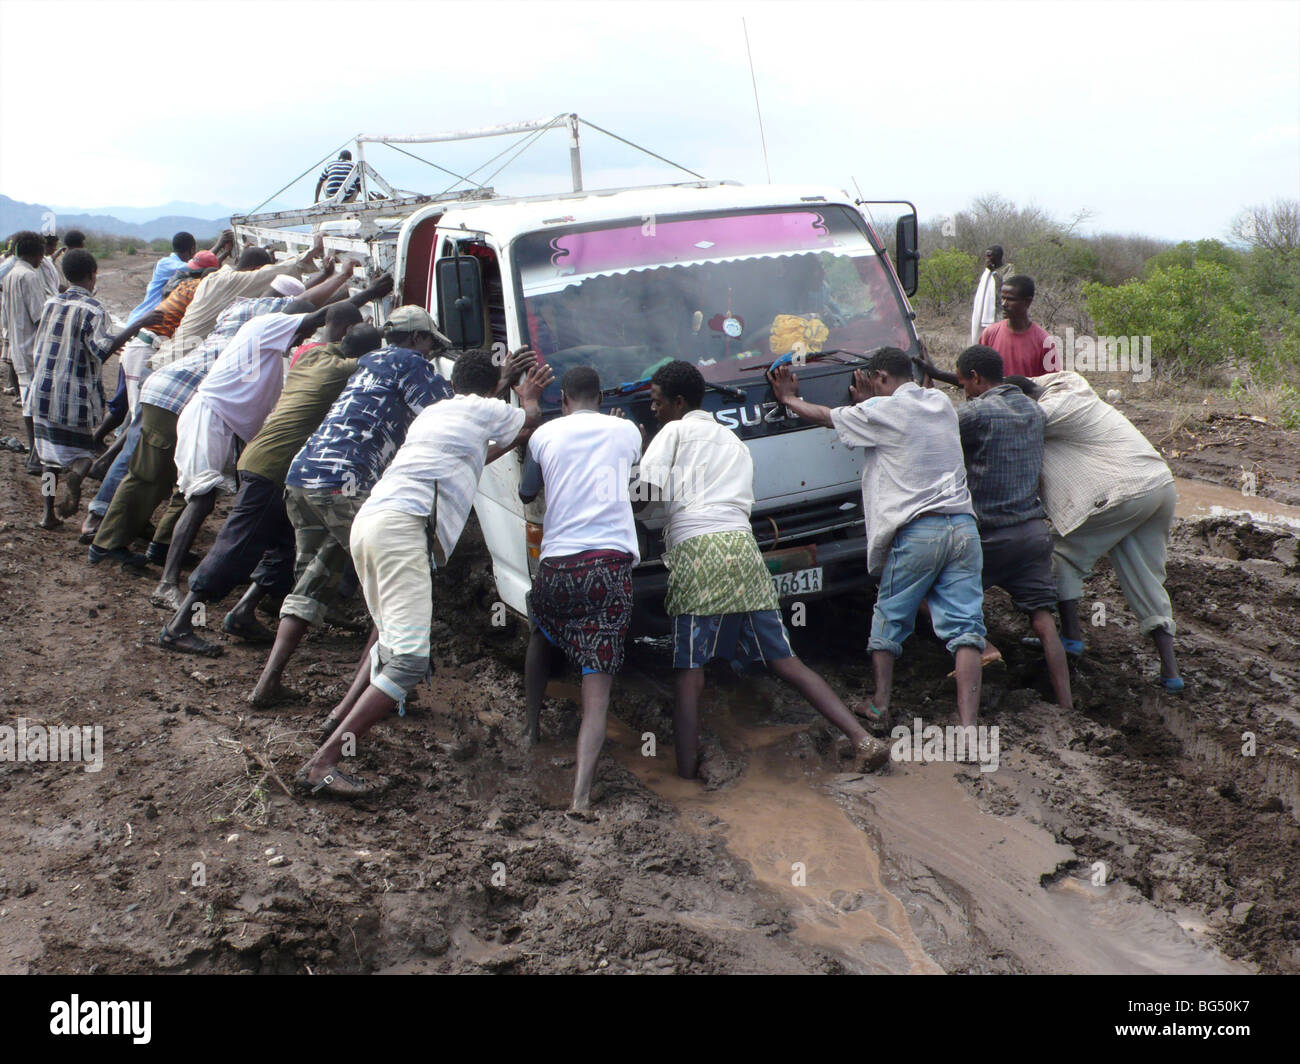 The roads are bad in Ethiopia and all the cars get stuck in the mud. Stock Photo